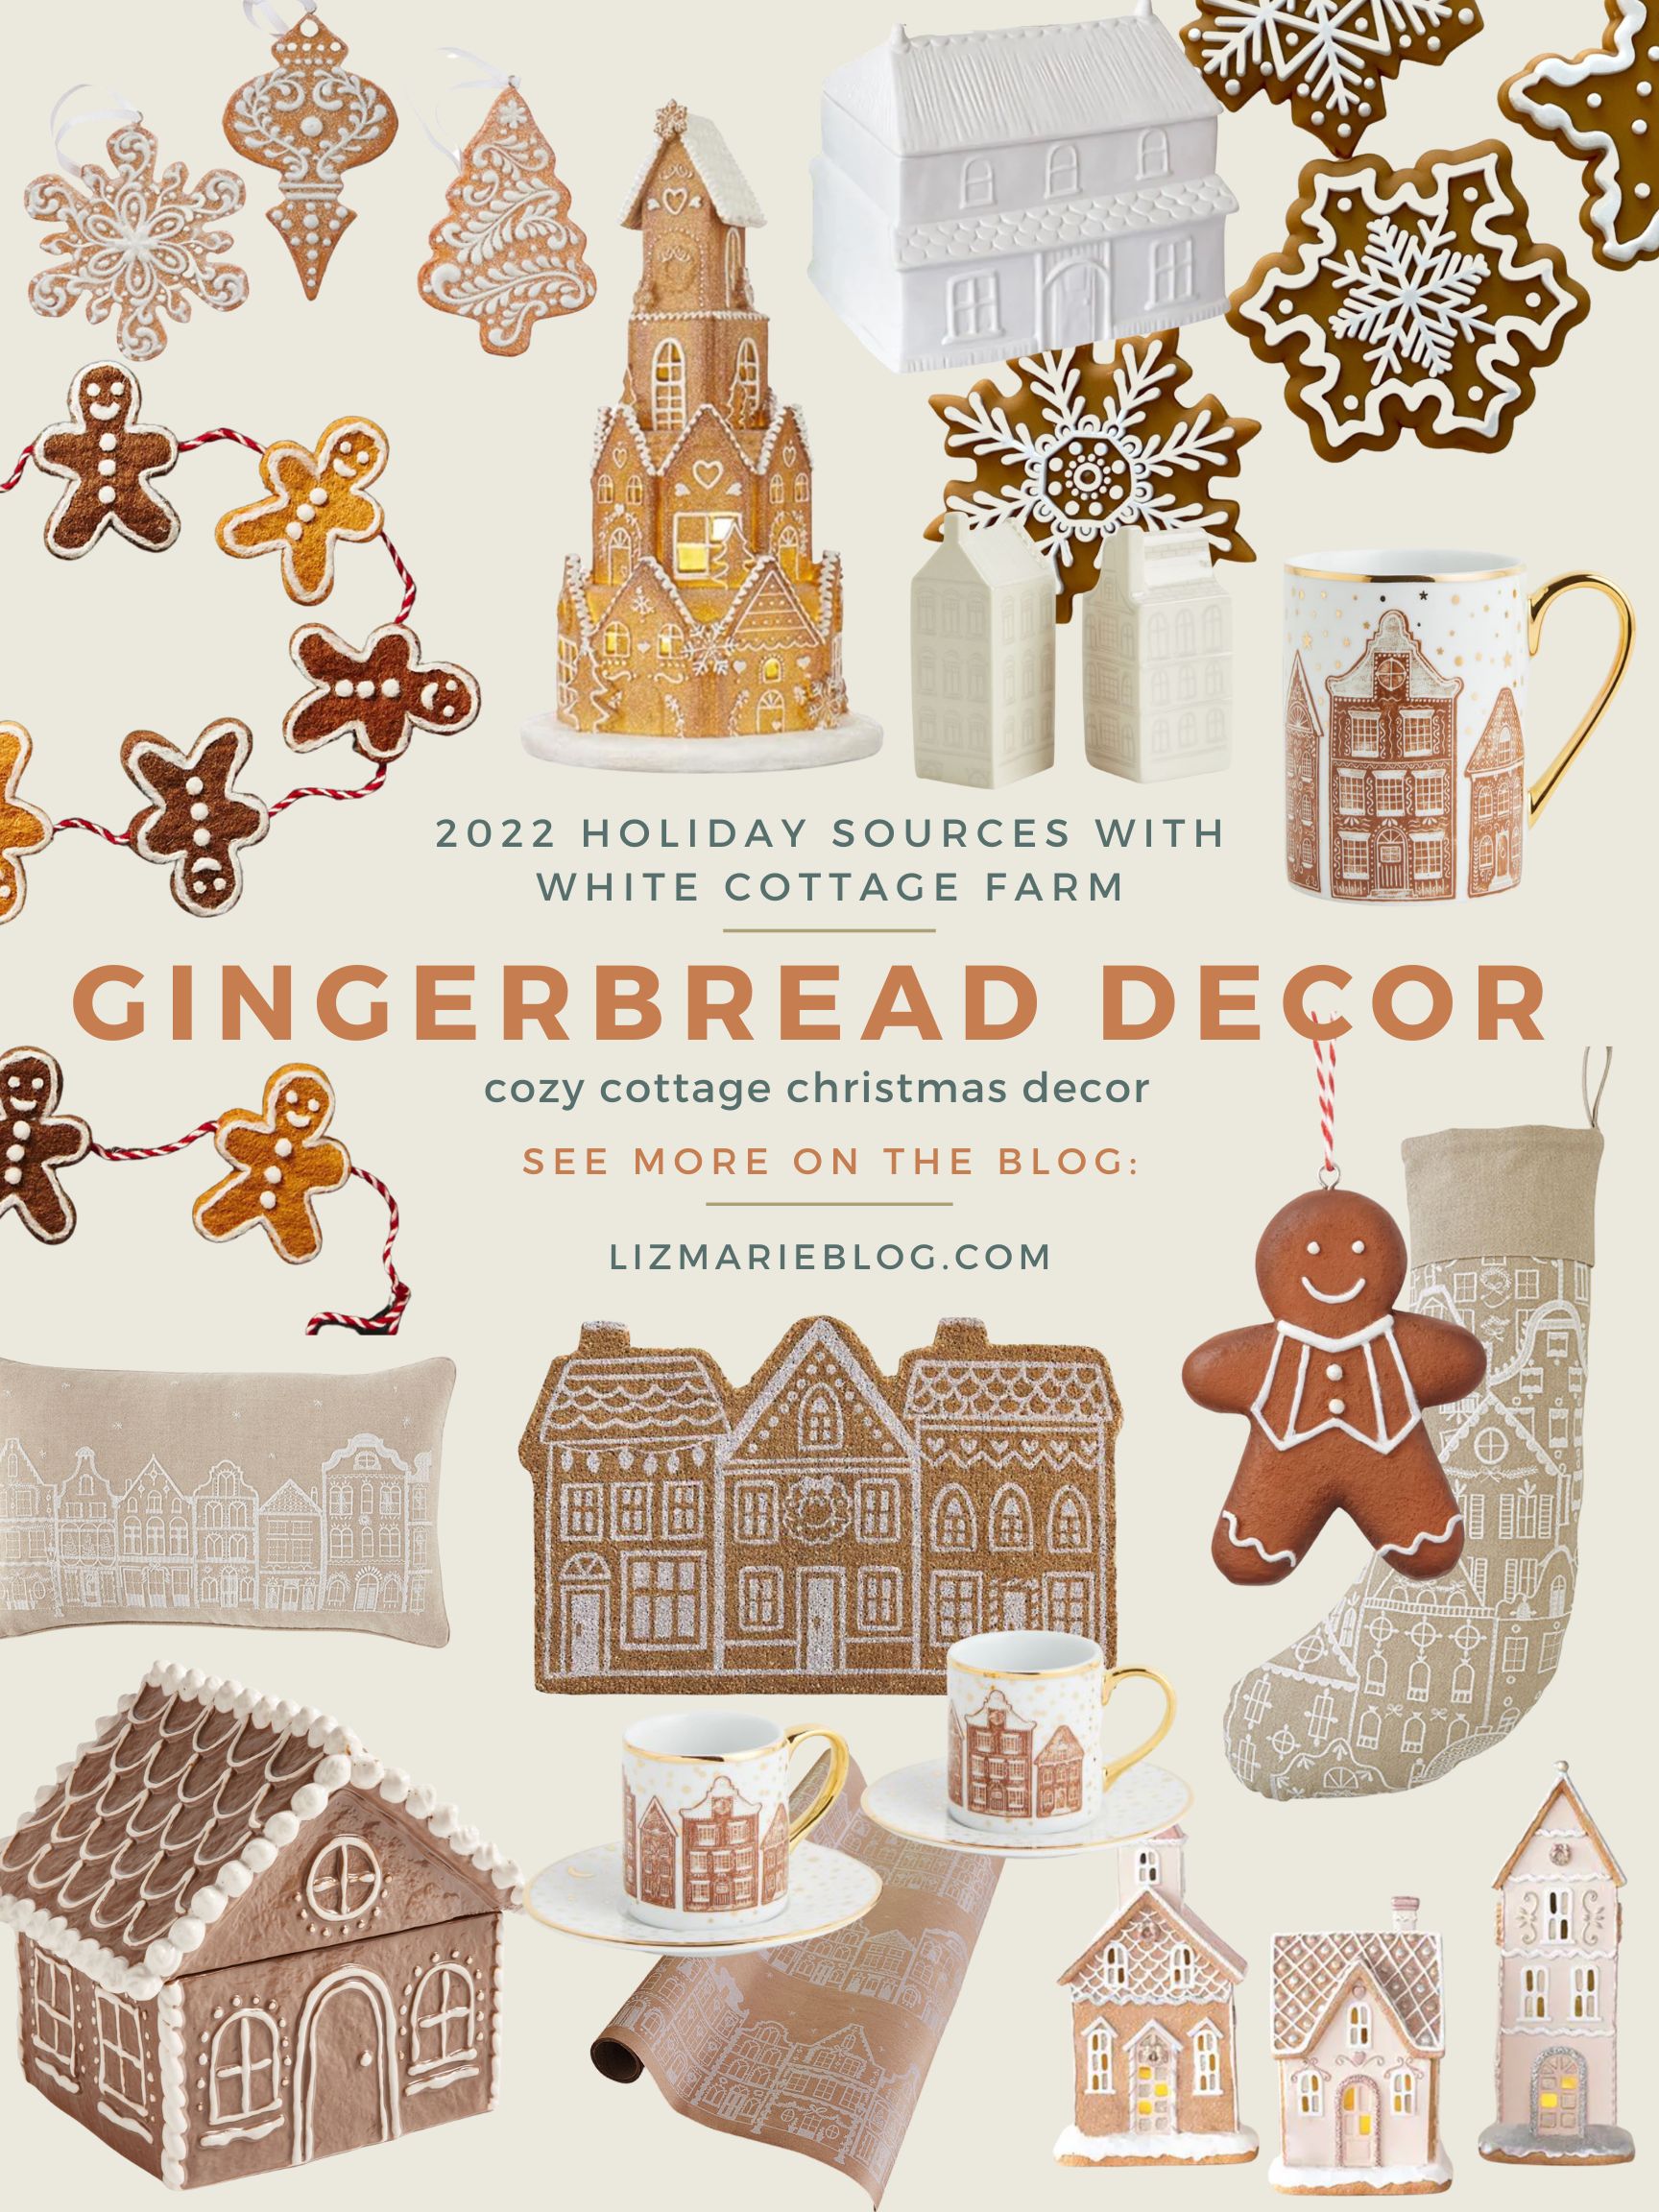 The Best Gingerbread Christmas Decor – Cozy Cottage Christmas Decor